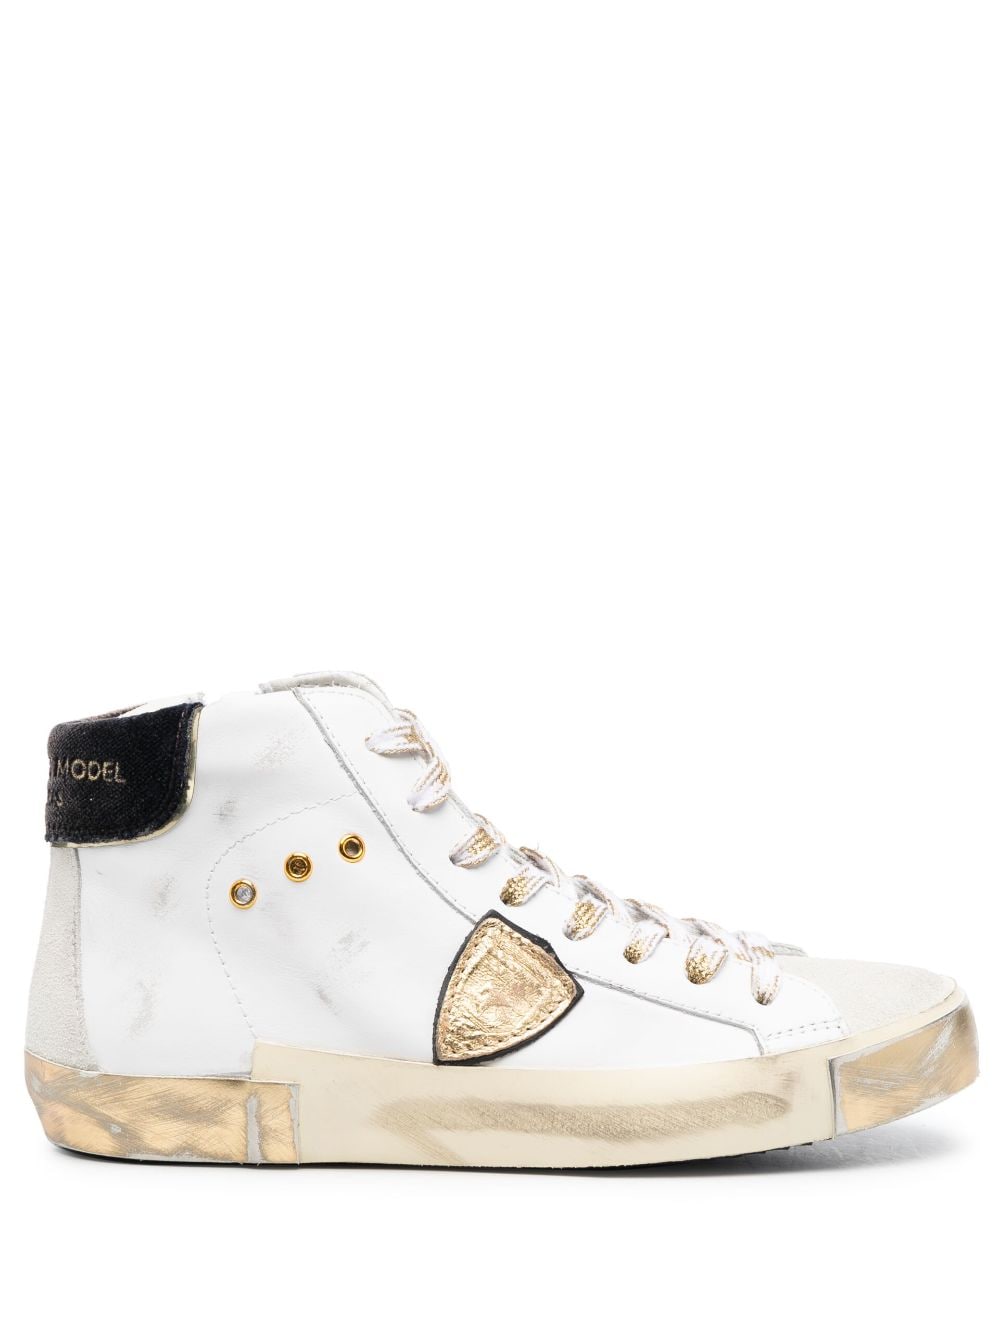 Philippe Model Paris Prsx High-top Sneakers In White